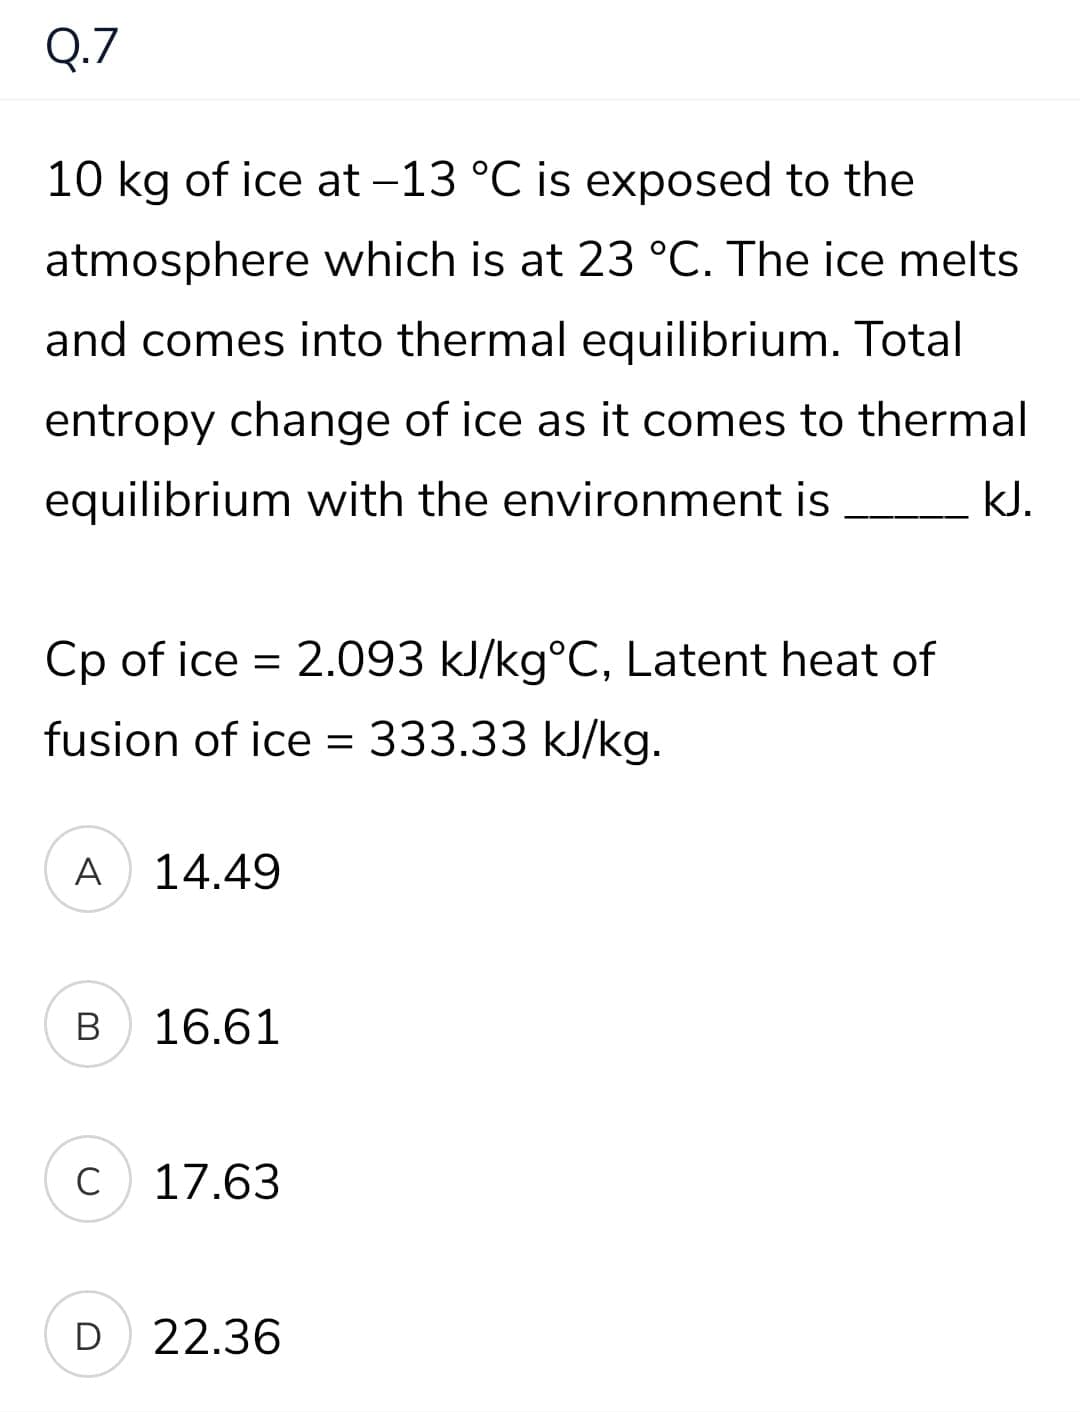 Q.7
10 kg of ice at -13 °C is exposed to the
atmosphere which is at 23 °C. The ice melts
and comes into thermal equilibrium. Total
entropy change of ice as it comes to thermal
equilibrium with the environment is
kJ.
Cp of ice = 2.093 kJ/kg°C, Latent heat of
fusion of ice = 333.33 kJ/kg.
A
14.49
B
16.61
C
17.63
D
22.36
